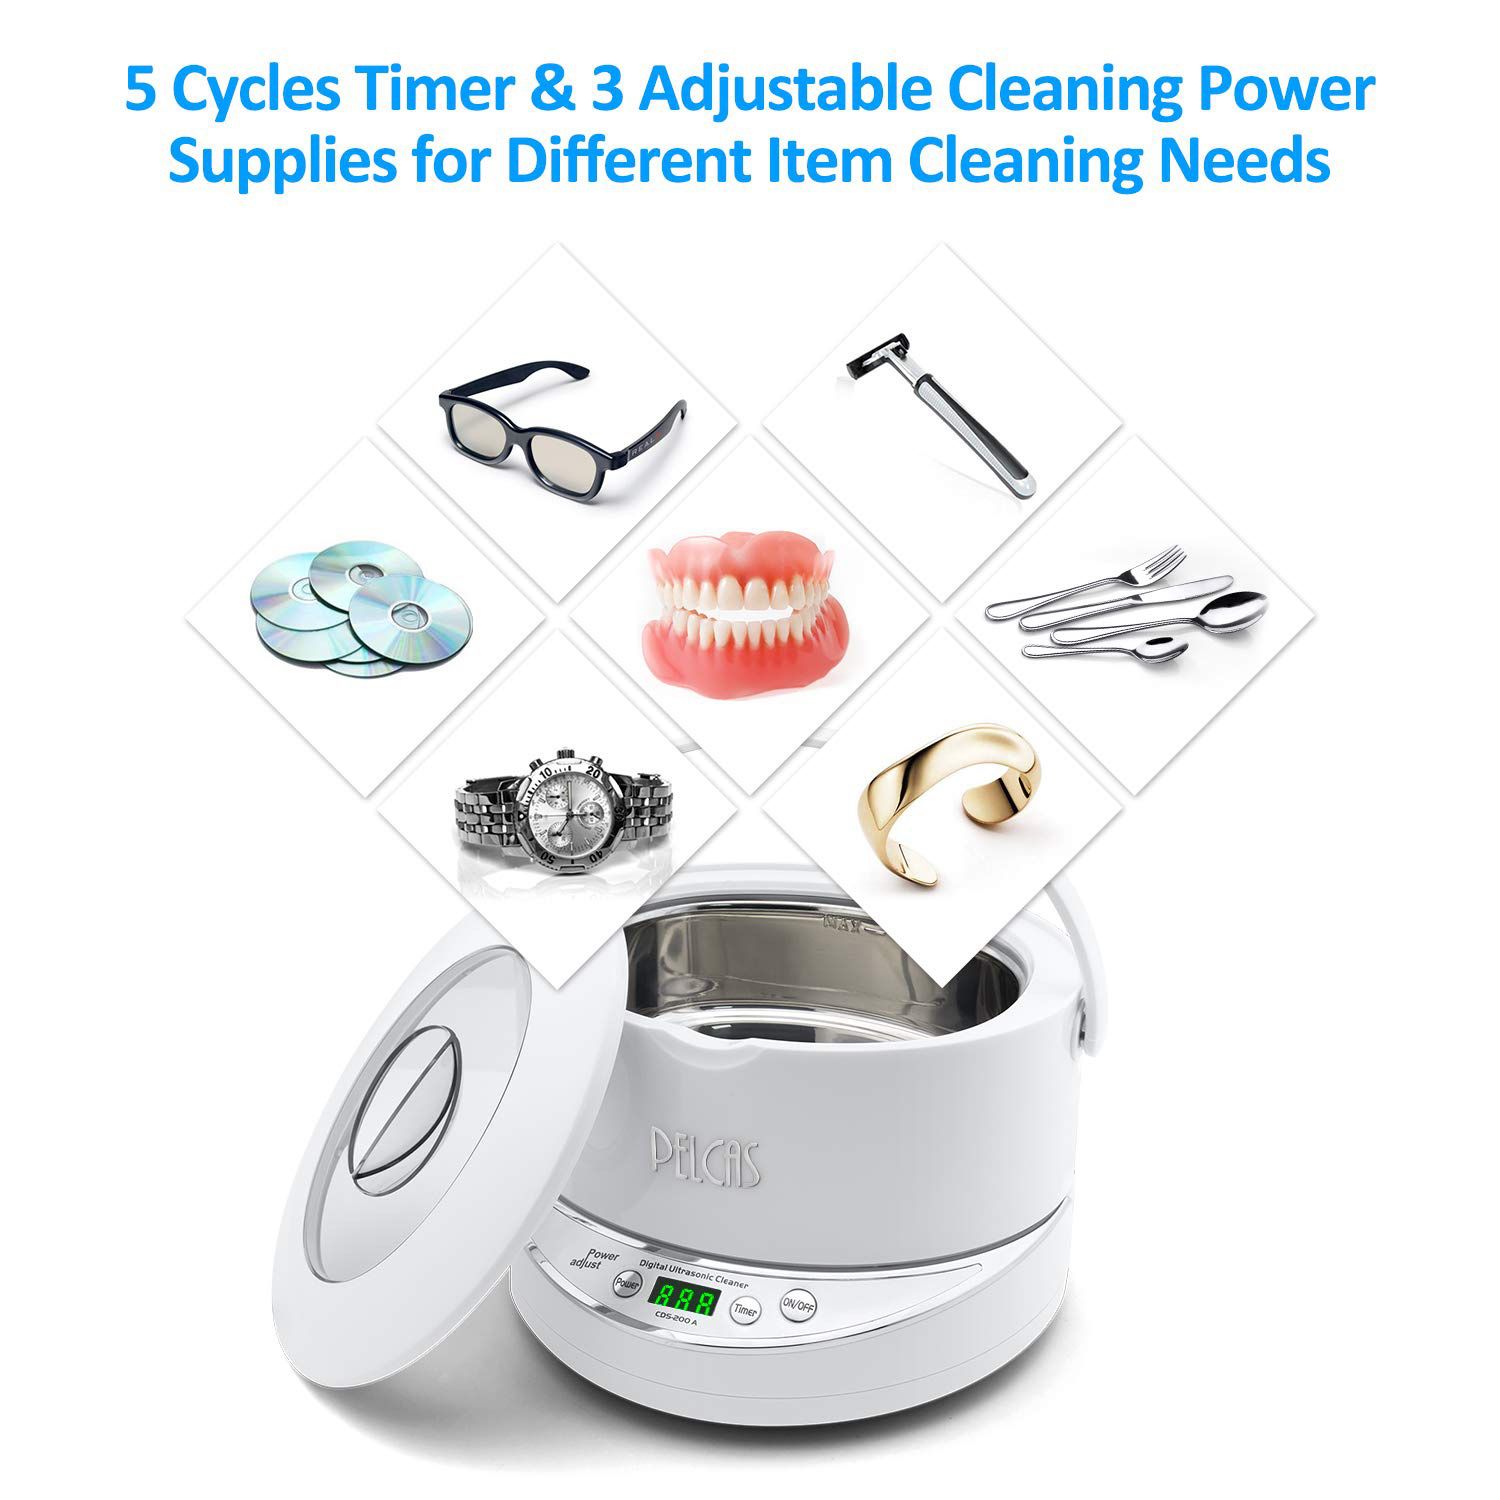 Ultrasonic Cleaner 25 Oz (750ml) Ultrasonic Jewelry Cleaner Machine with Detachable Tank 42000HZ Jewelry Cleaner with 5 Digital Timer Watch for Jewelr